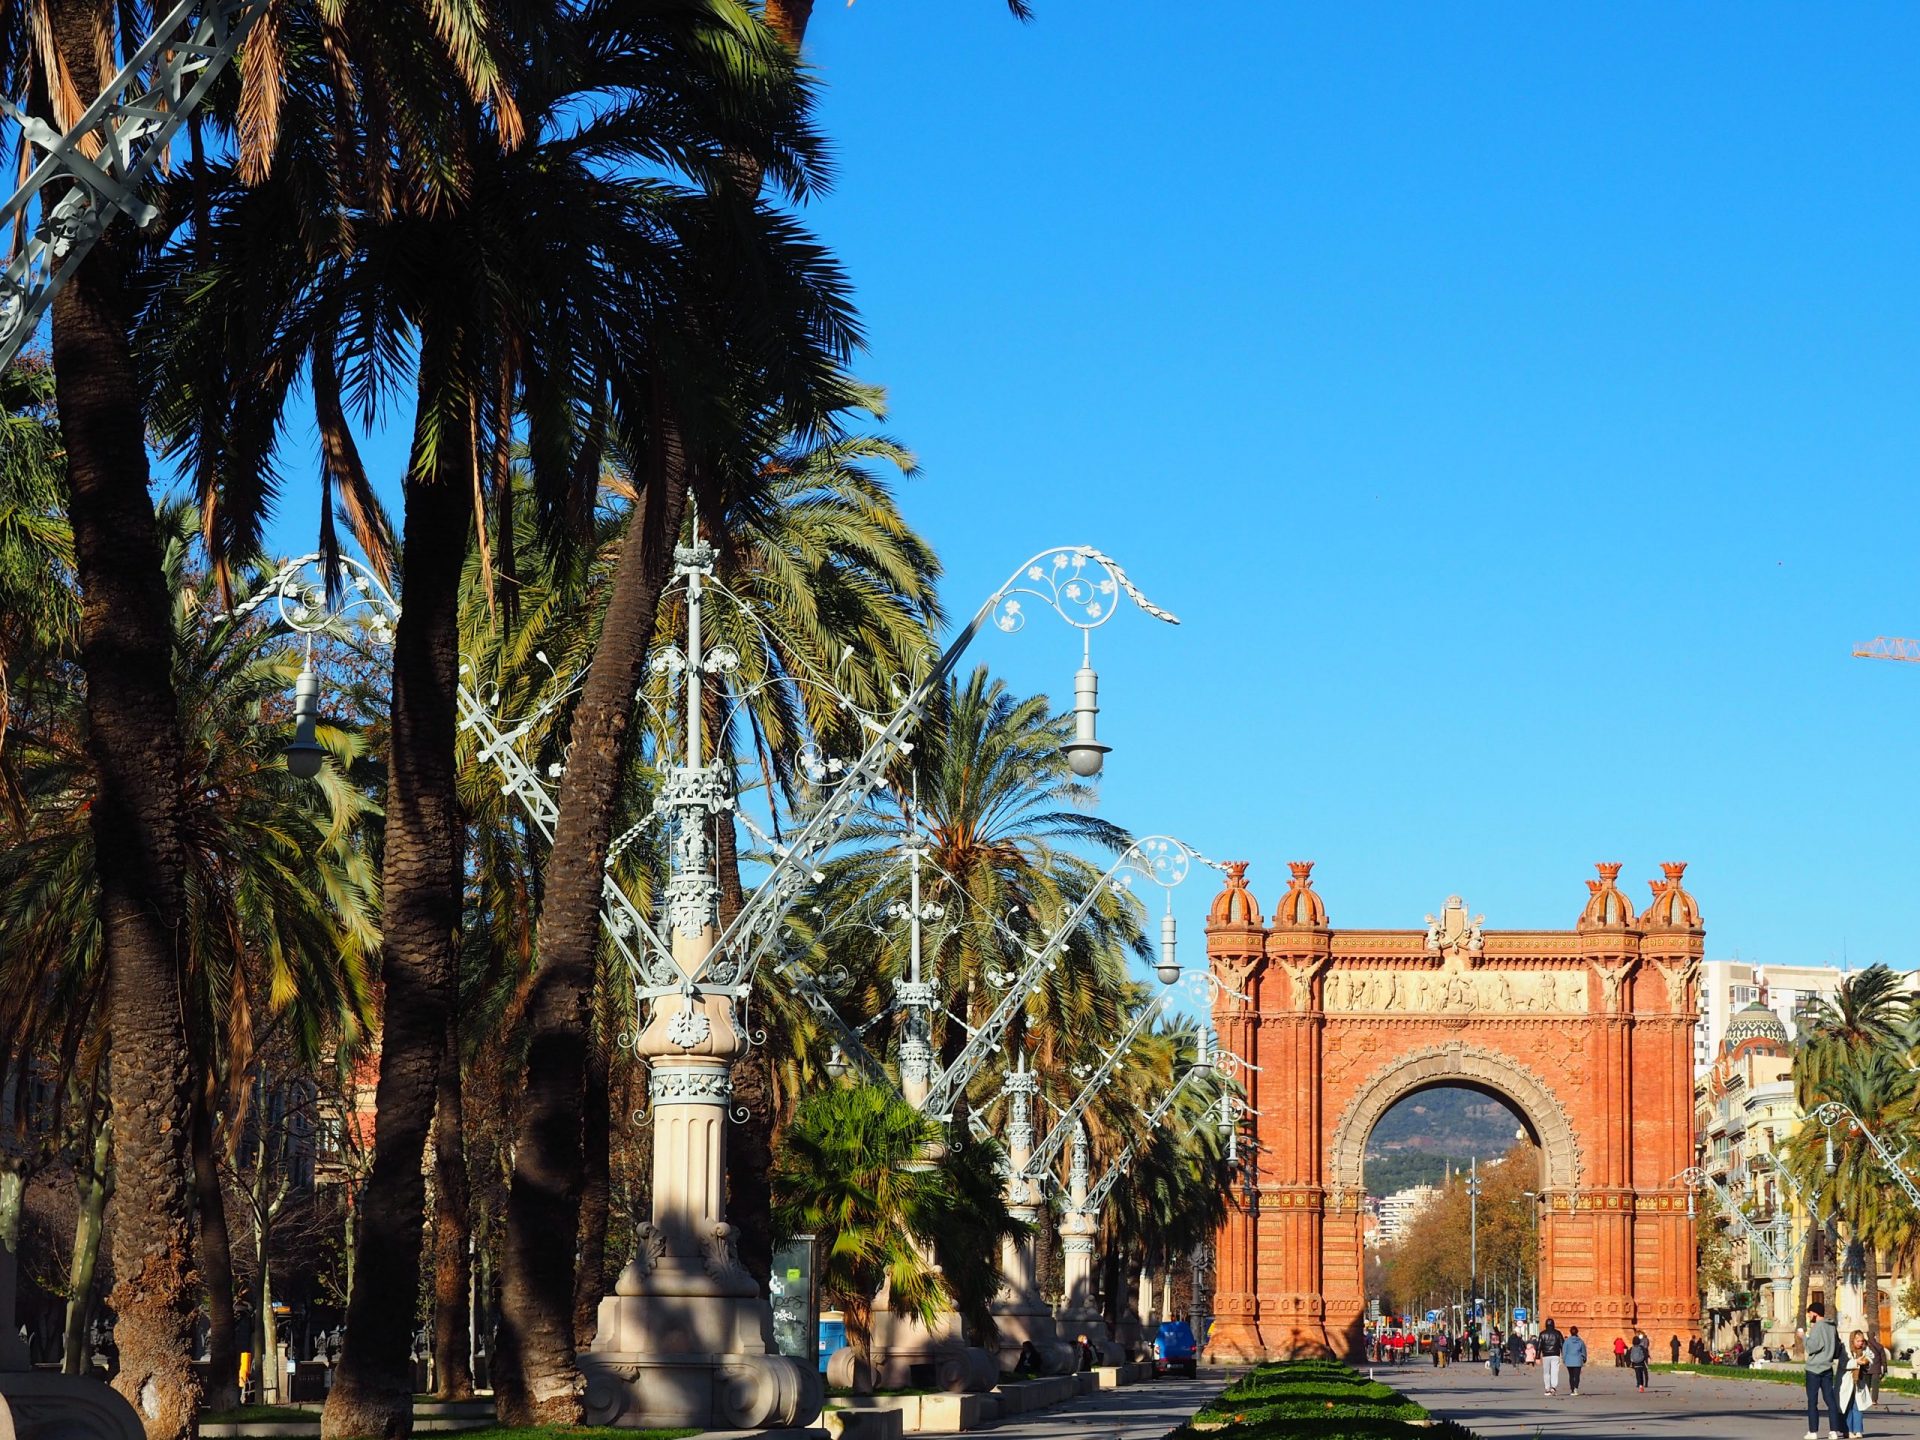 The view during Barcelona virtual tours with the Arc de Triomf